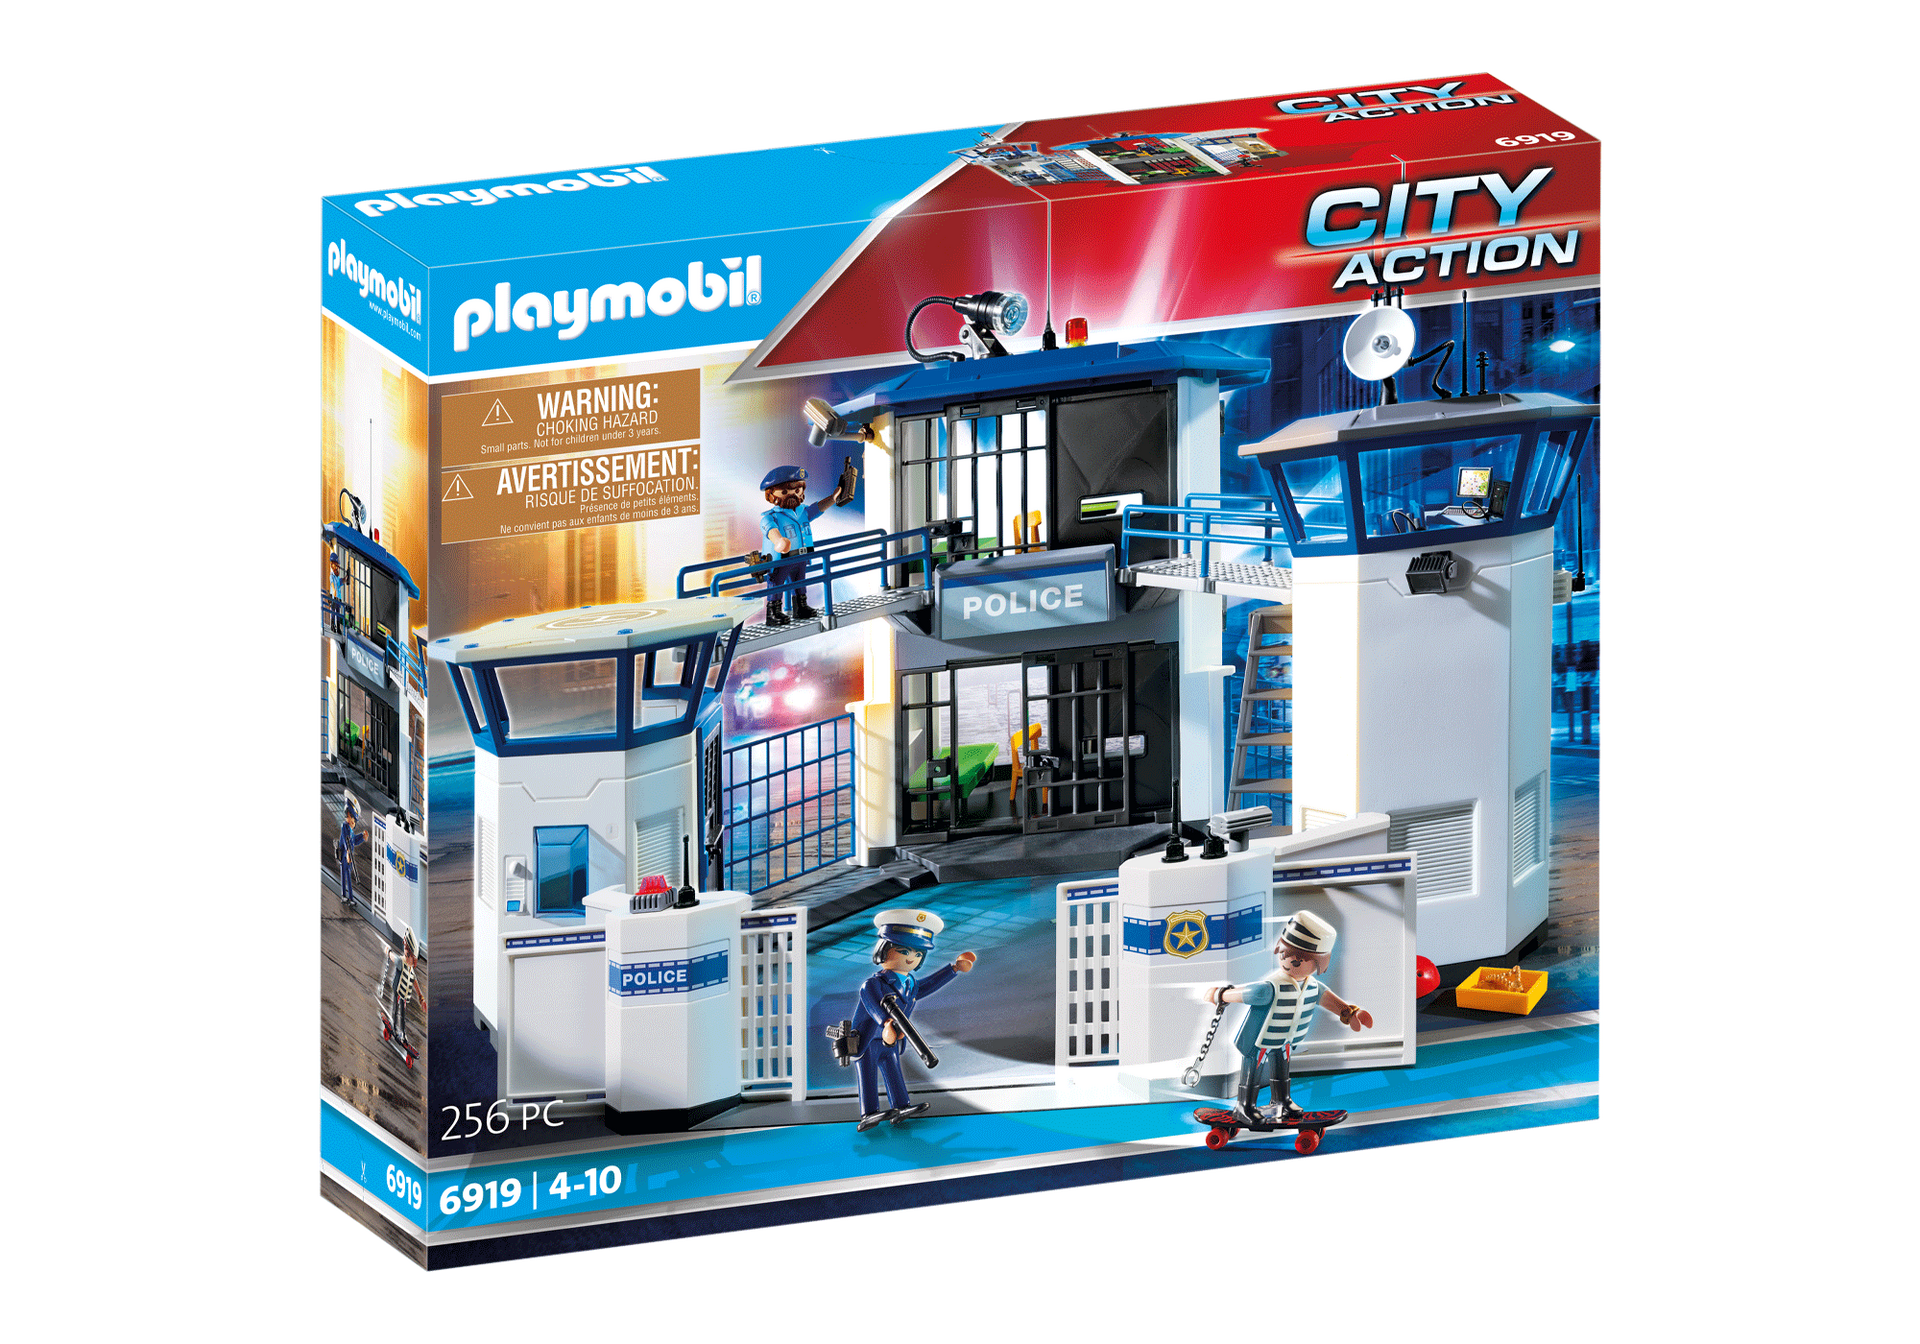 Playmobil @ @ @ @ clip fasteners @ @ @ @ house building @ @ police wall chateau @ a60 